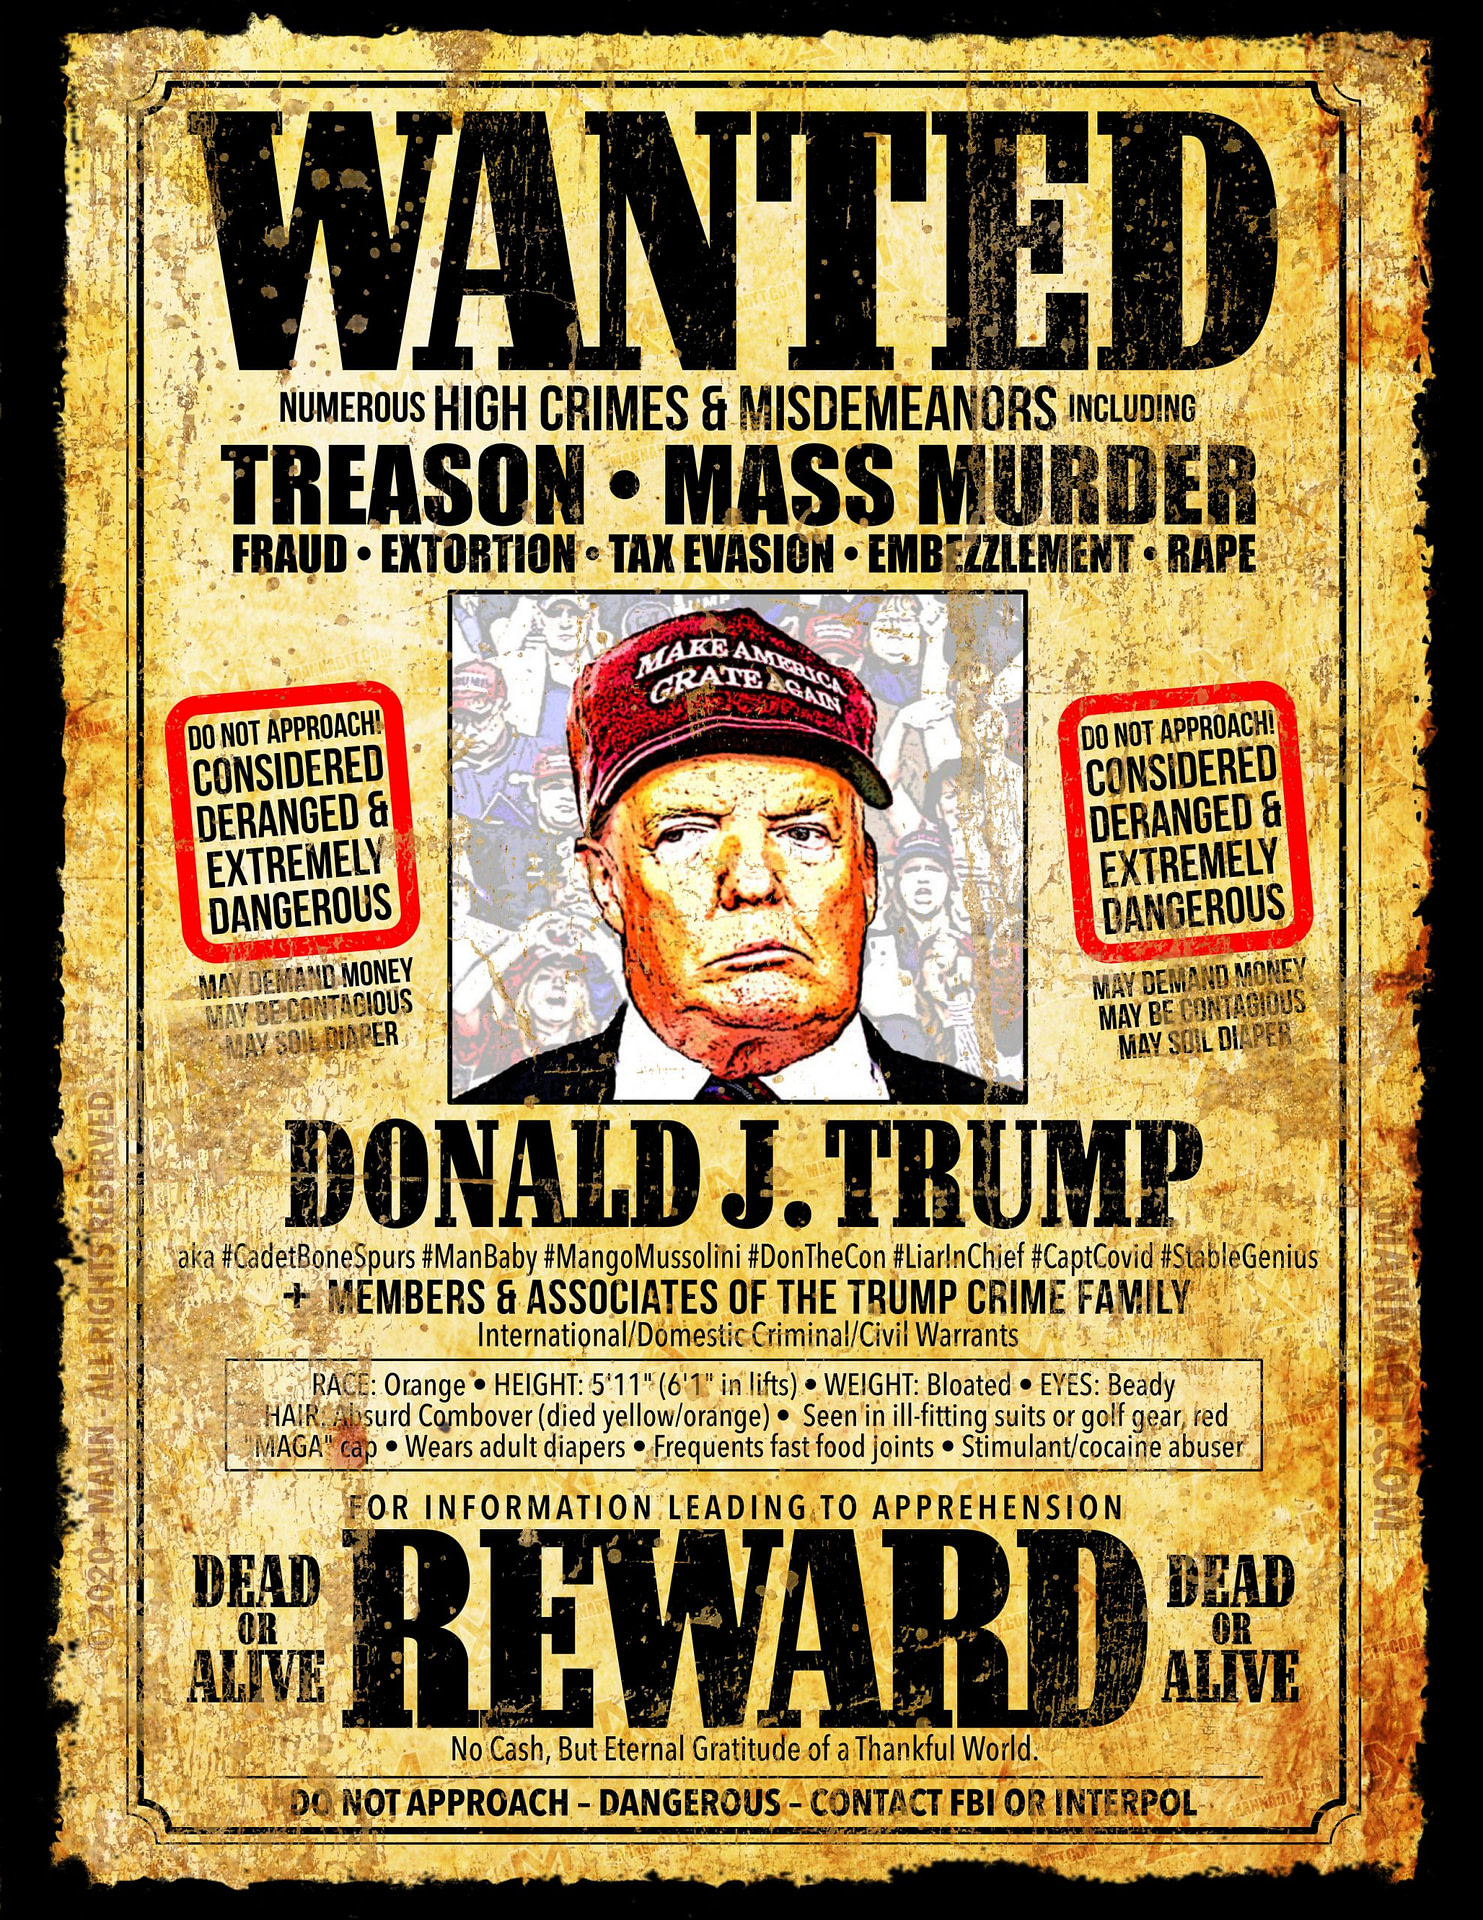 ANTI TRUMP POSTER / DONALD TRUMP POSTER / FUNNY OLD WEST WANTED POSTER art, done as an "old west" style, weathered broadsheet.